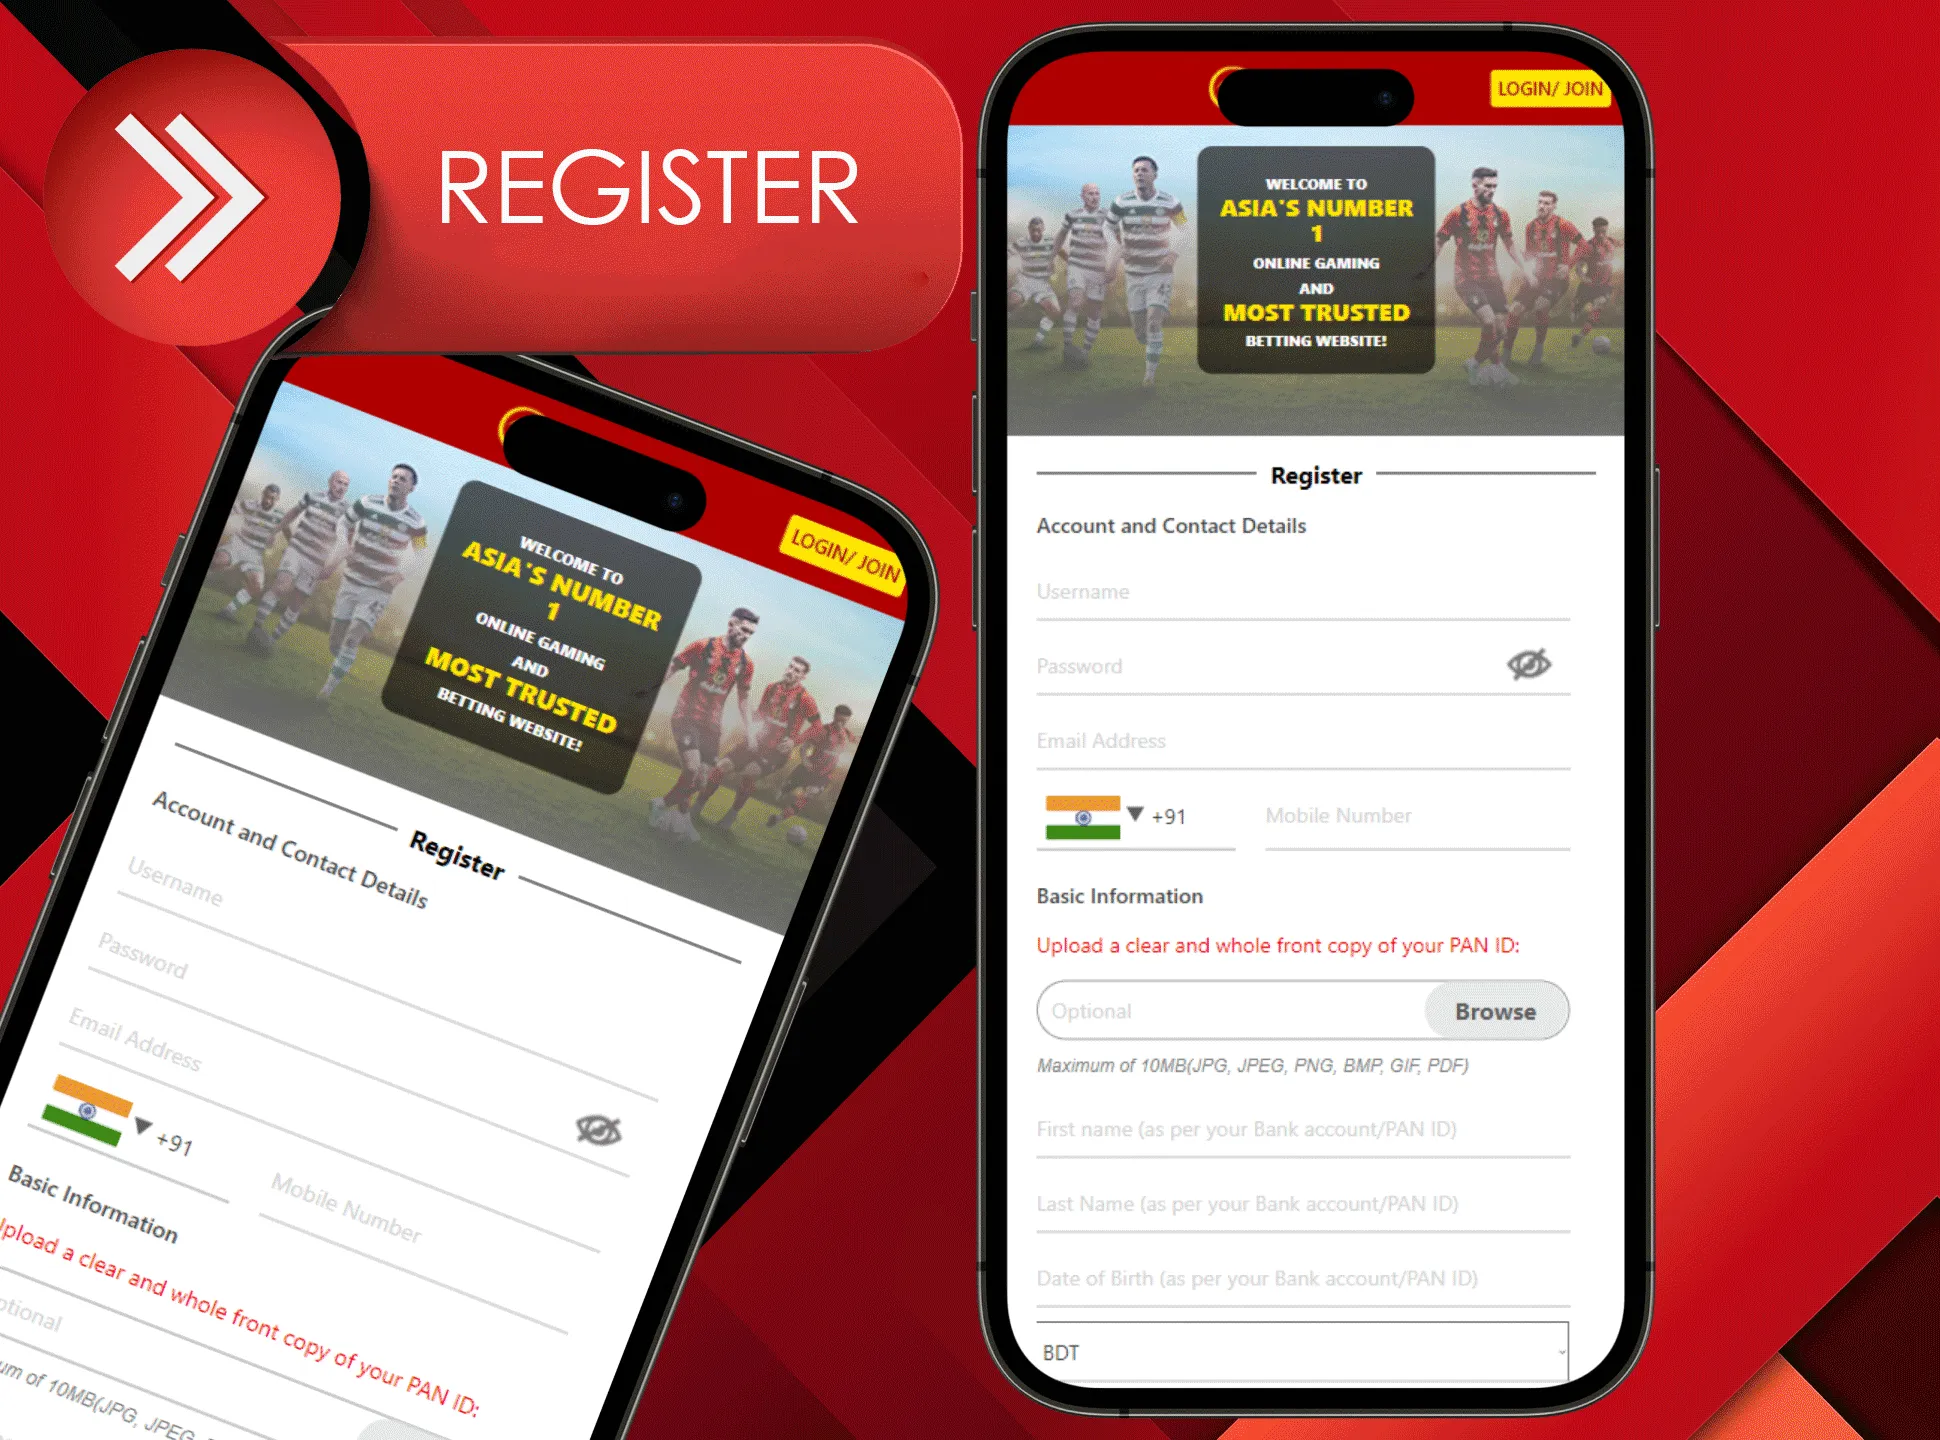 Fill in all the fields in the registration form and sign up for Dafabet.